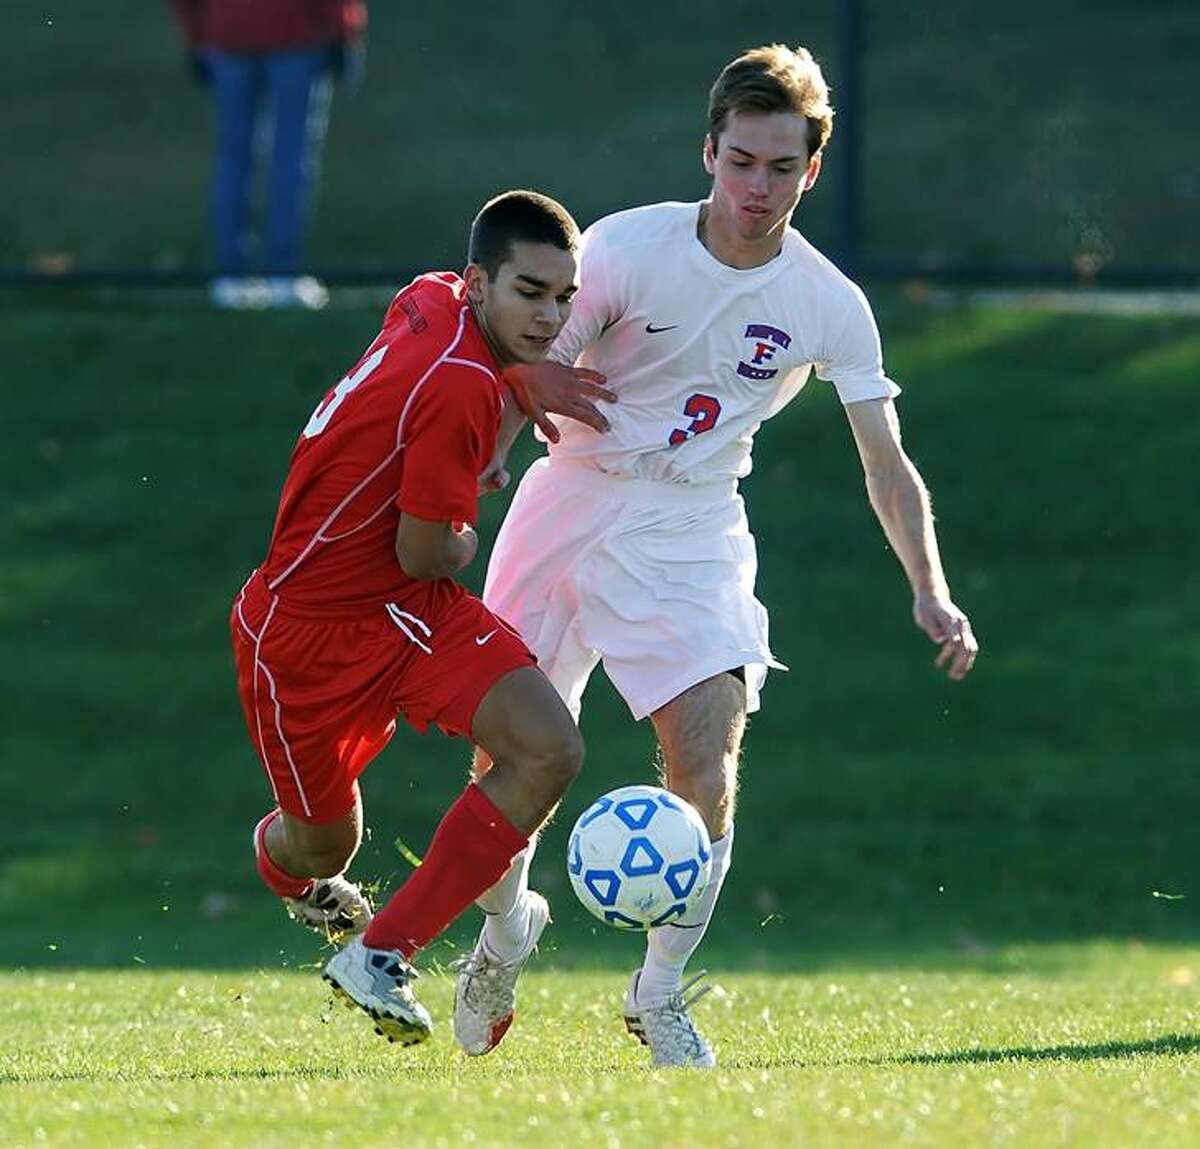 Guilderland's Daniel Dibiase, left, battles for the ball against Fairport's Alex Mangerian in a Class AA state semifinal at Middletown High School on Saturday, Nov. 16, 2013. Fairport advances to the Class AA final after beating Guilderland, 3-1. (Adrian Kraus / Special to the Times Union)